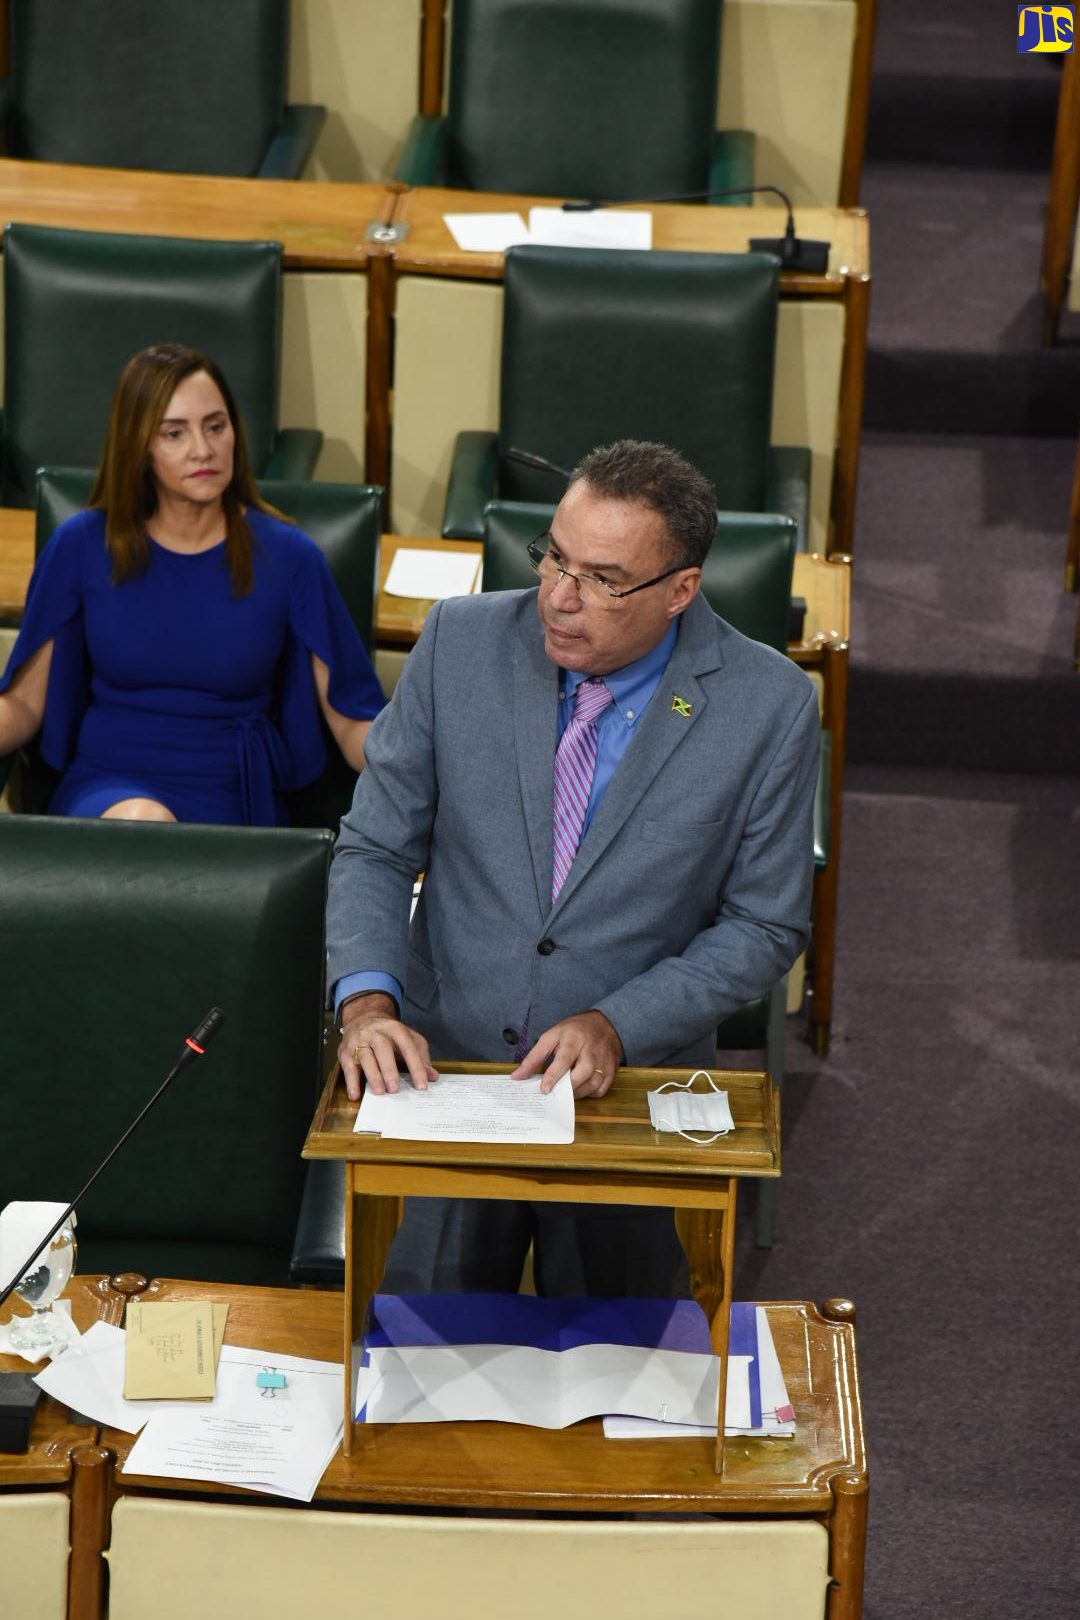 Minister of Science, Energy and Technology, Hon. Daryl Vaz, speaks in the House of Representatives on May 10. Listening to the Minister is his wife, Ann Marie Vaz, who is also Member of Parliament for Portland East.

